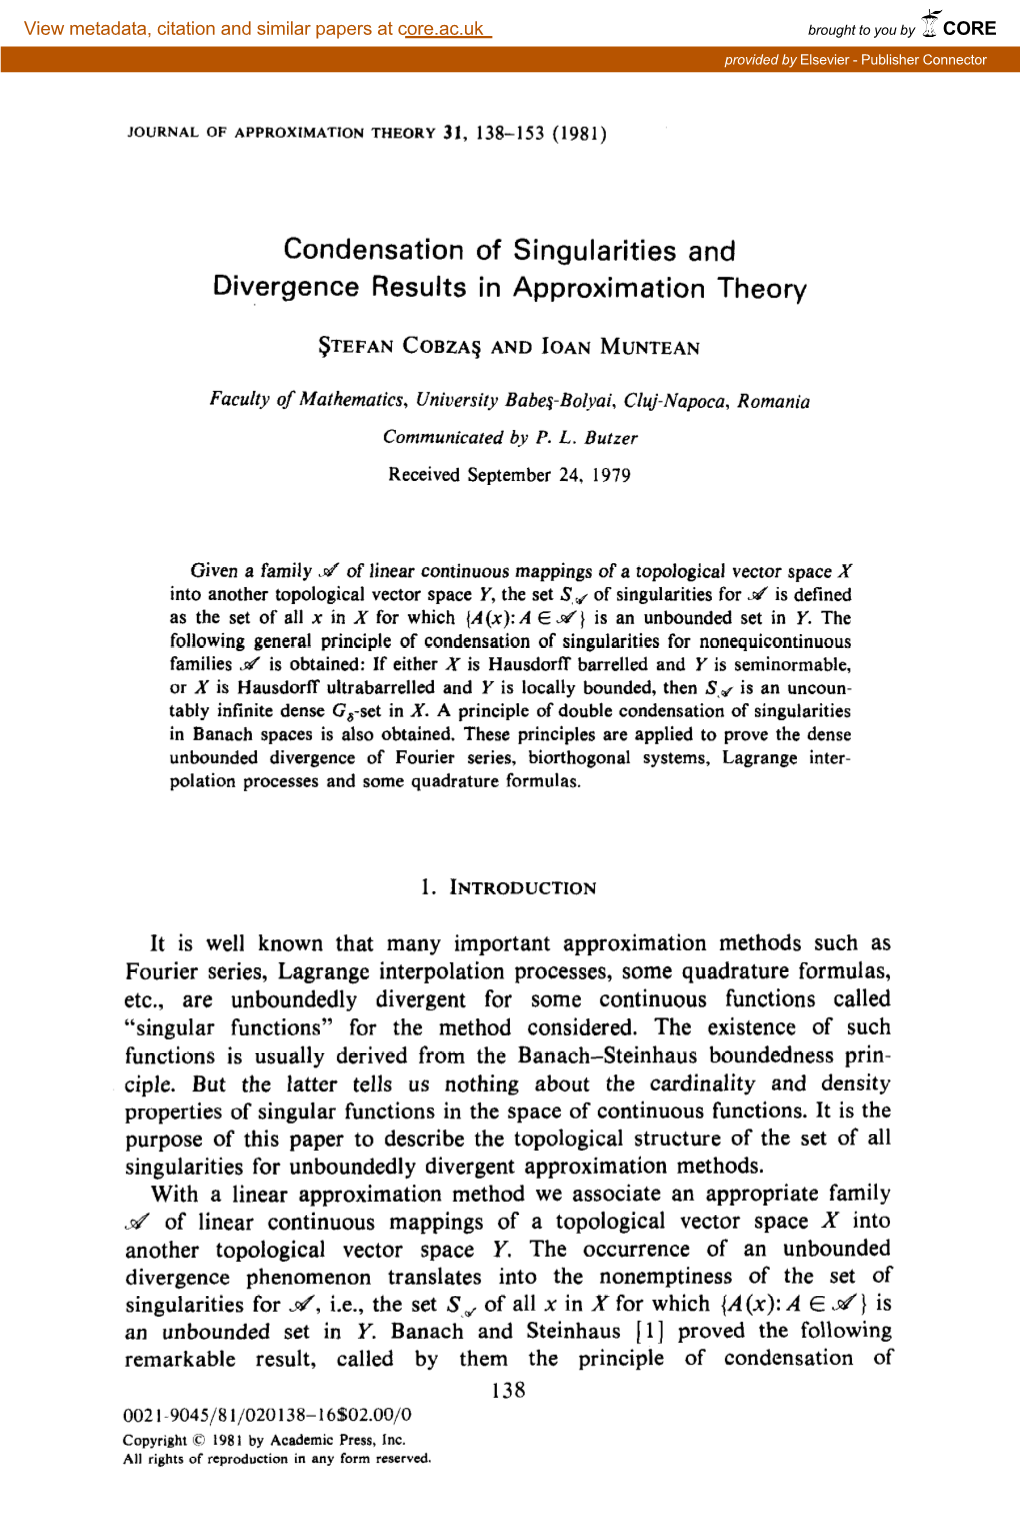 Condensation of Singularities and Divergence Results in Approximation Theory